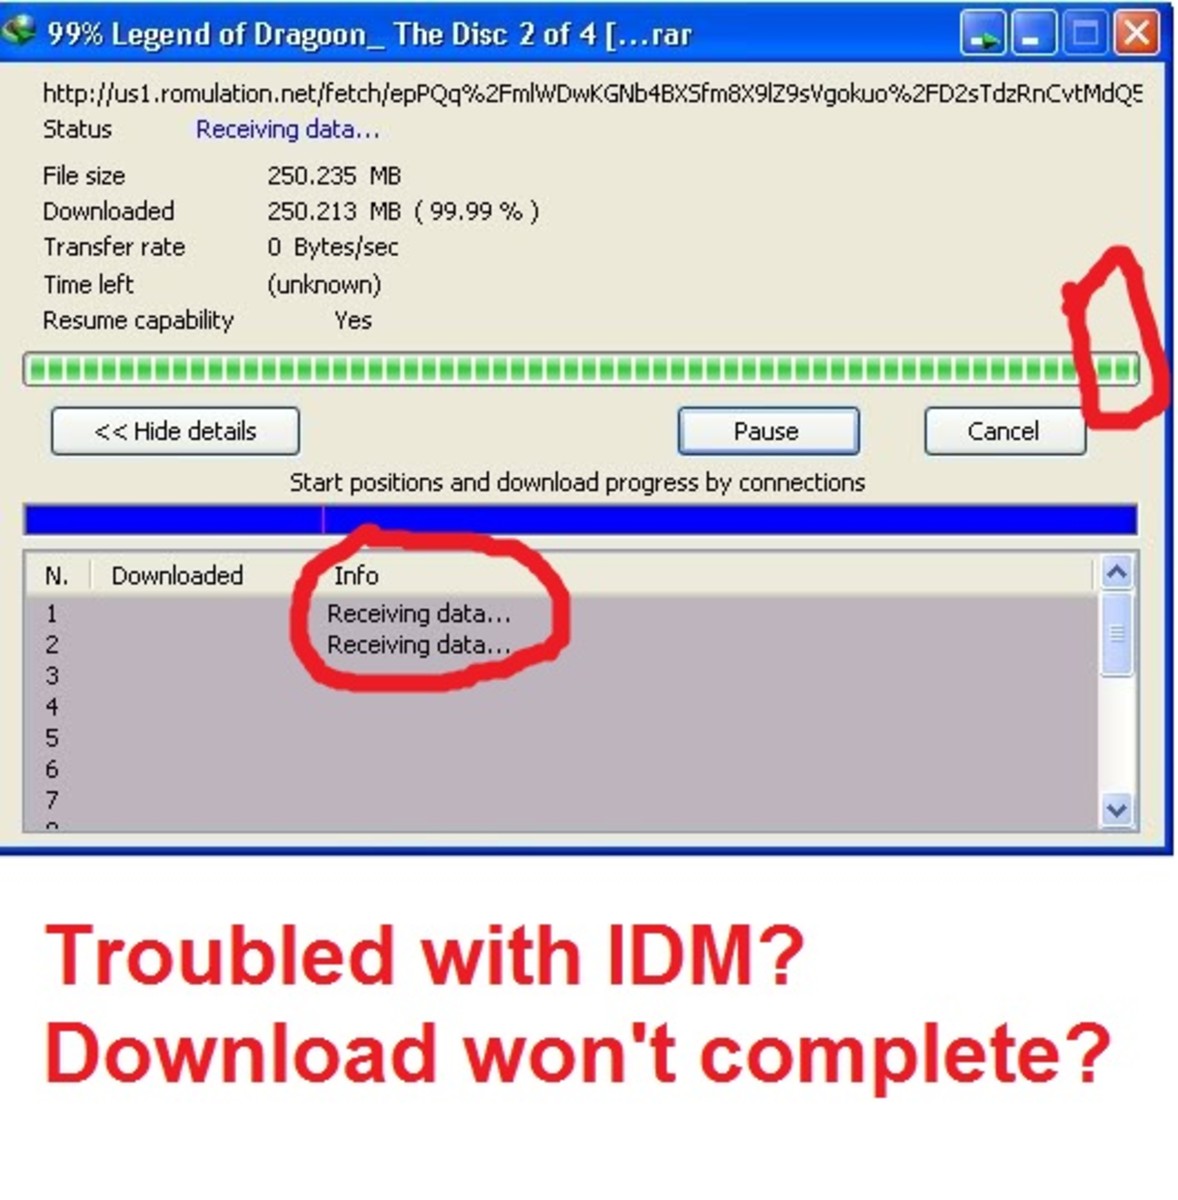 How to cancel a download